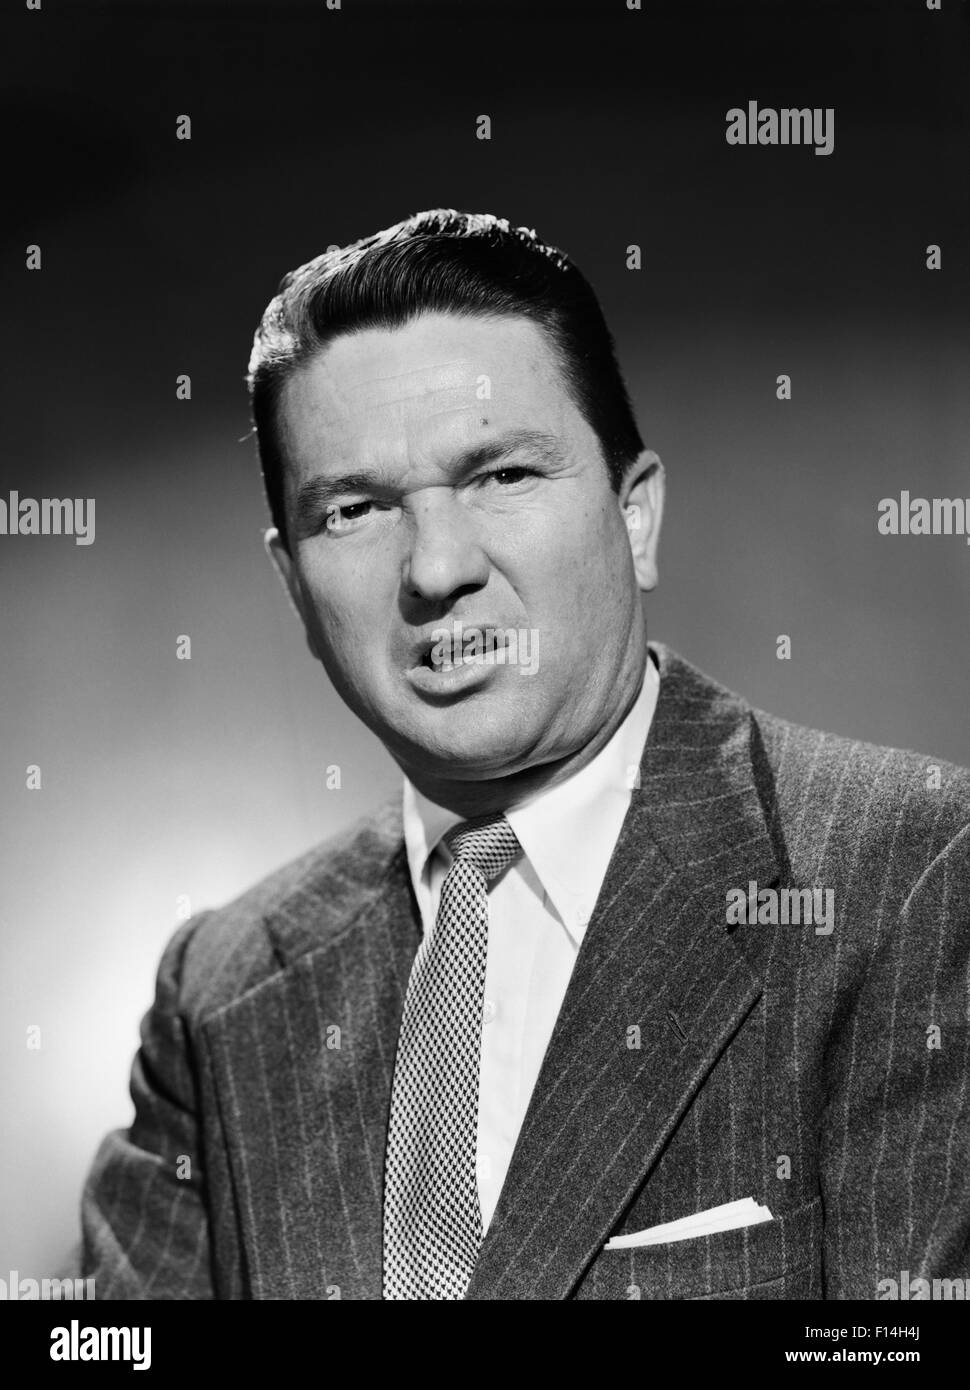 1950s BUSINESSMAN IN SUIT MAKING FUNNY SERIOUS FROWN FACIAL EXPRESSION ...